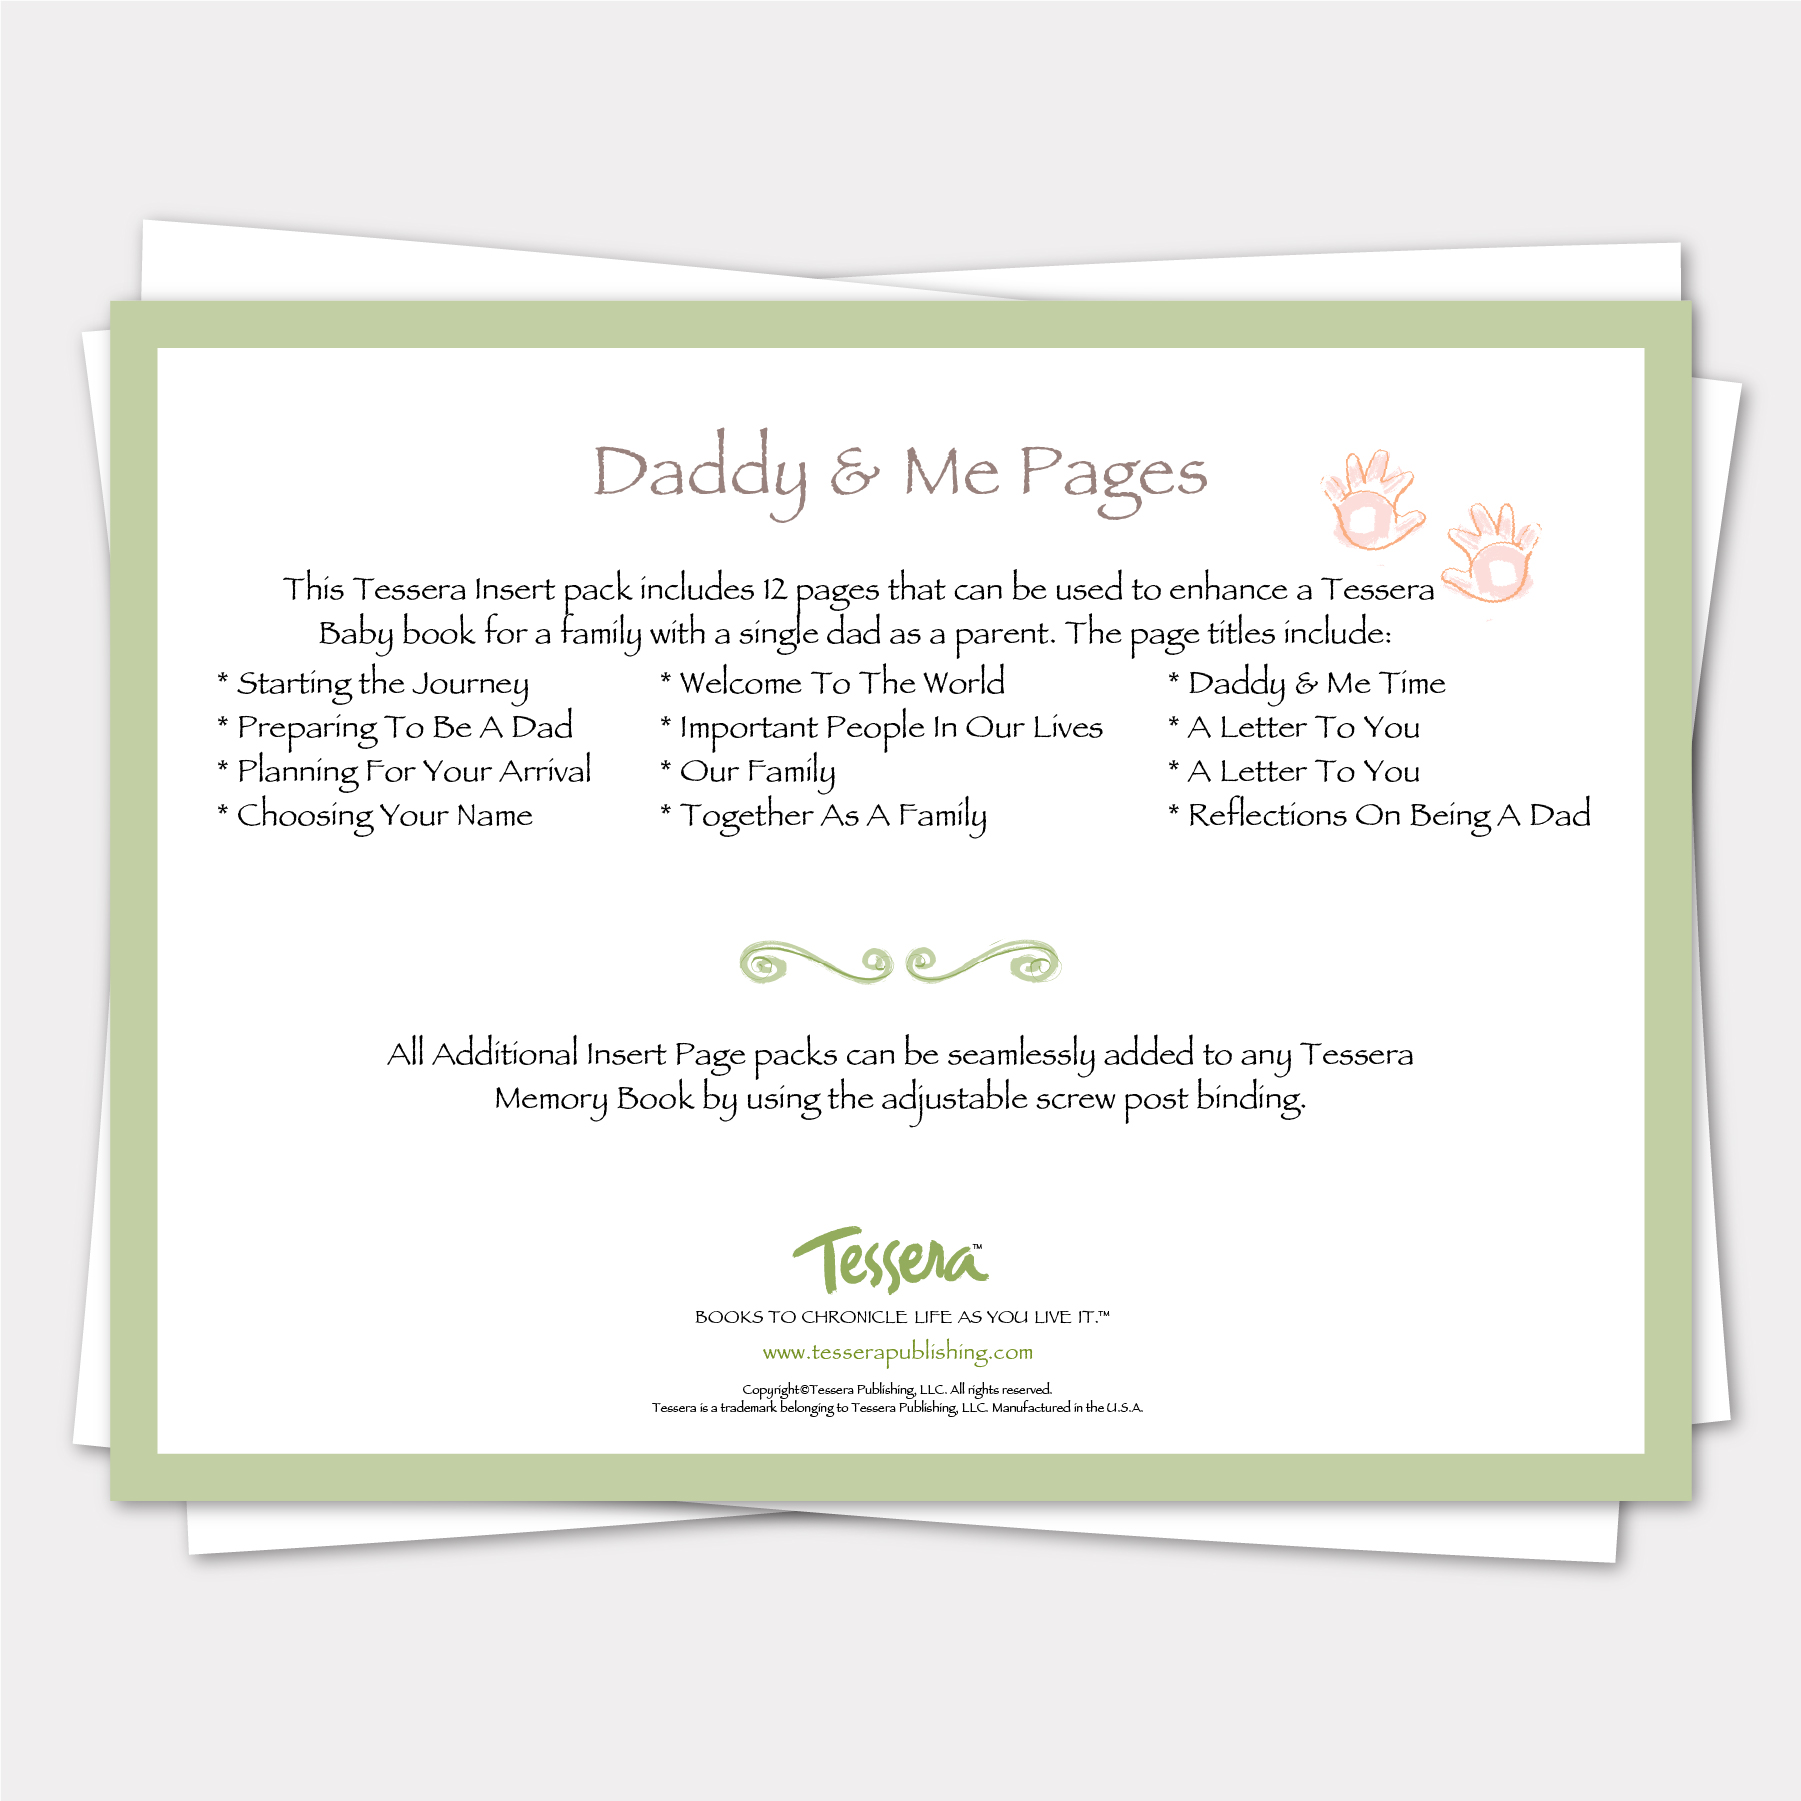 daddy & me single dad additional insert pages for tessera memory books